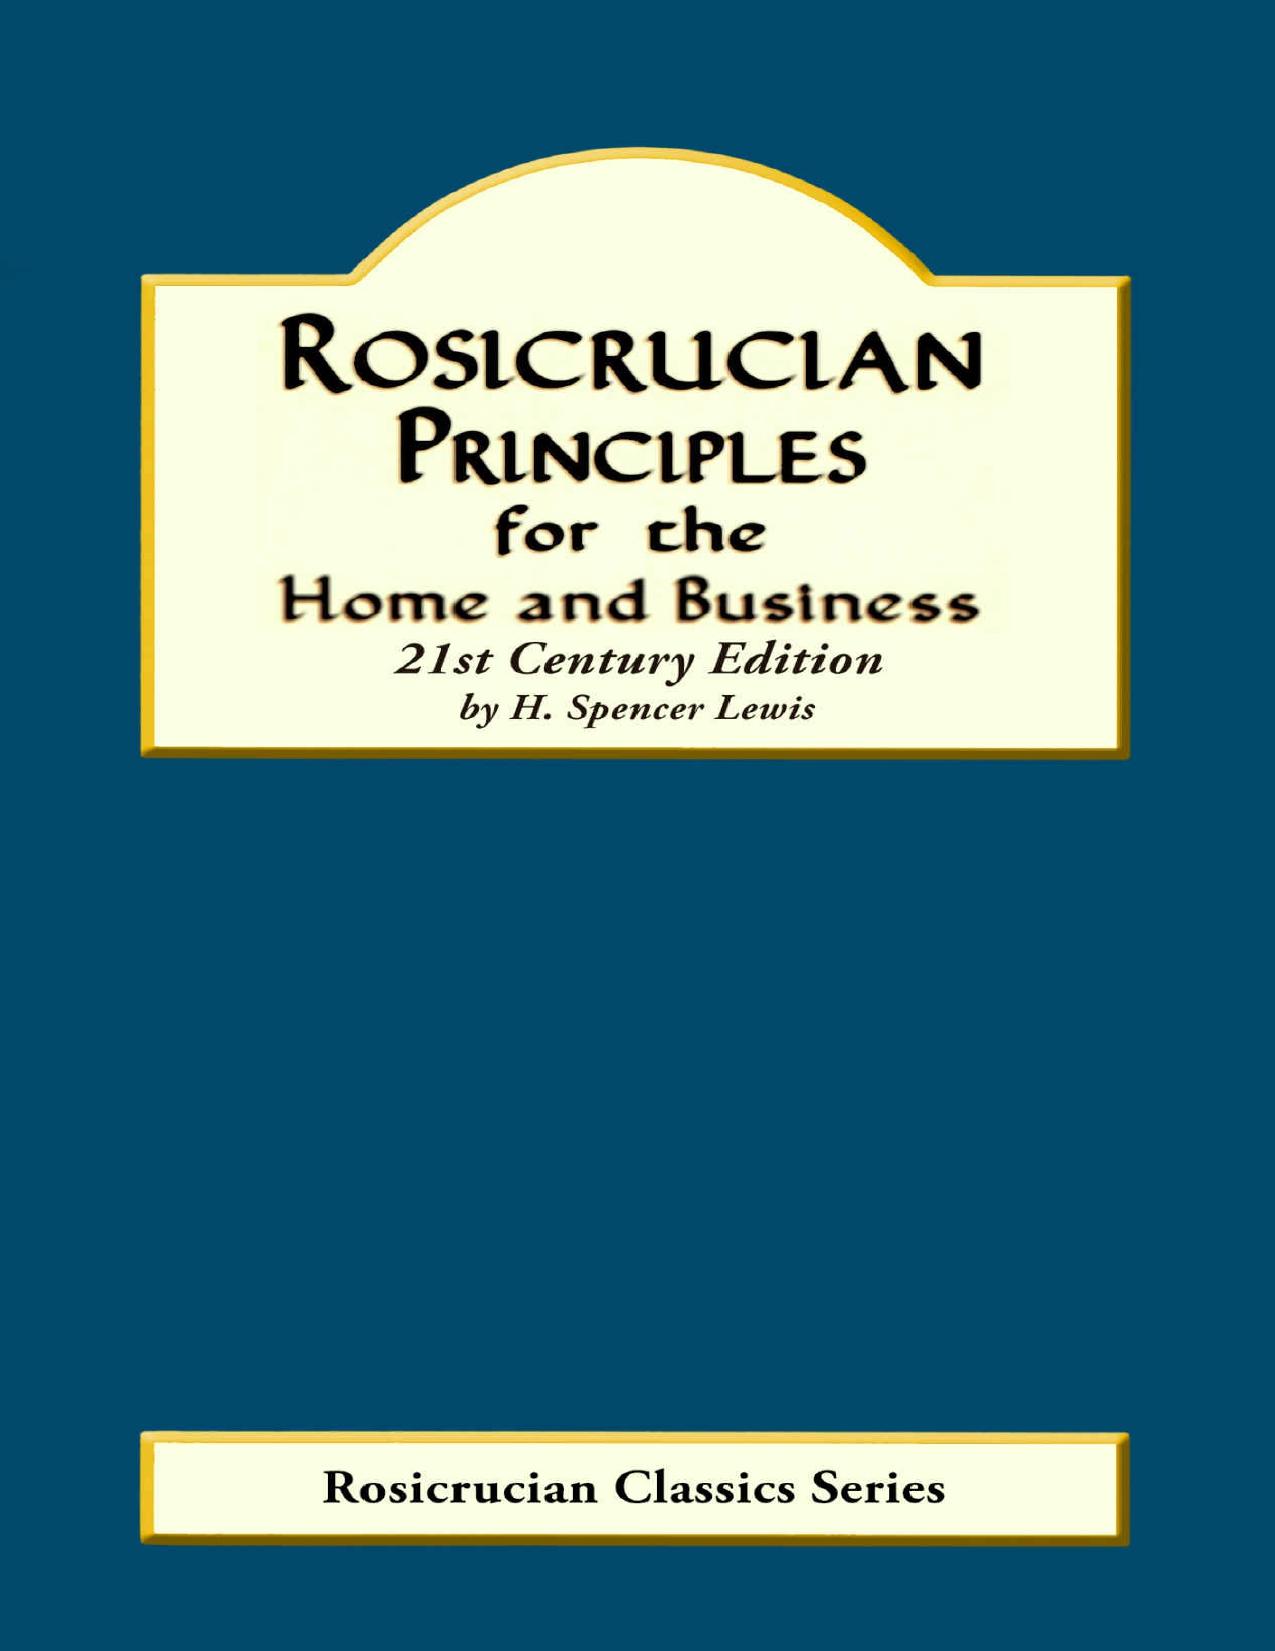 Rosicrucian Principles for the Home and Business